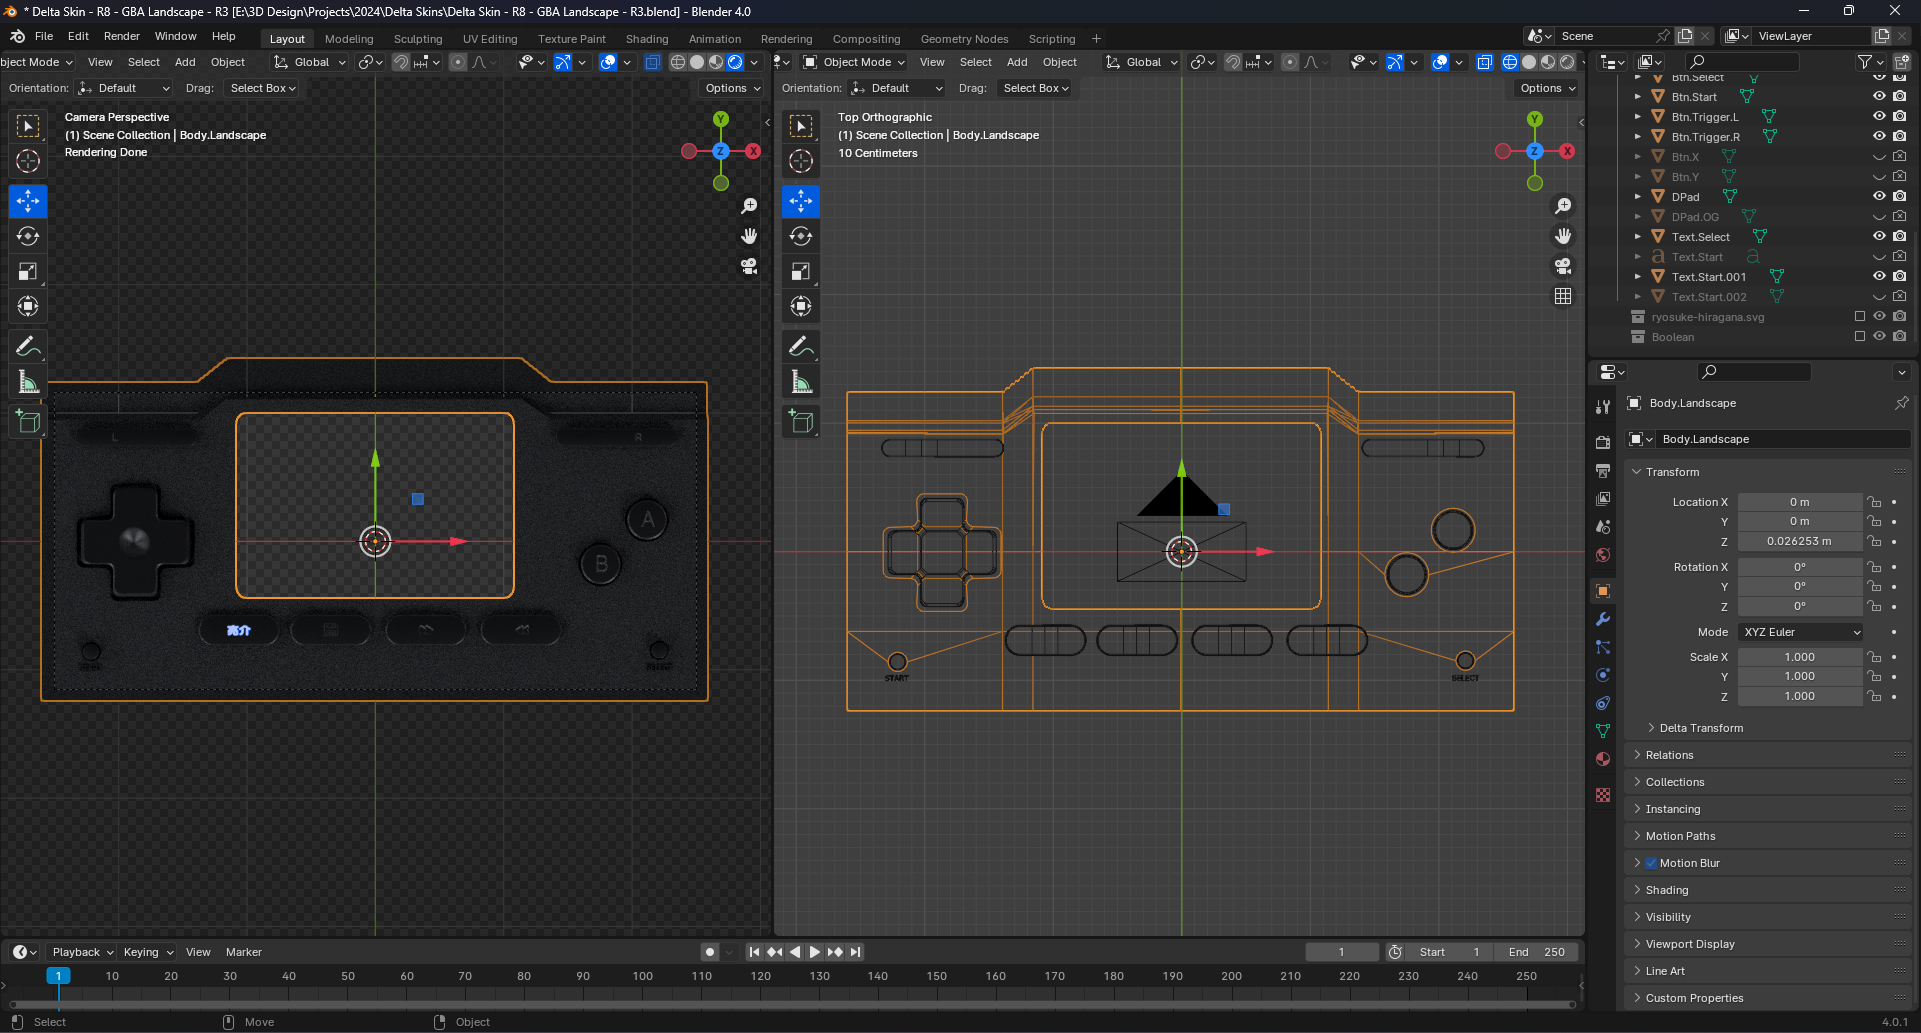 Screenshot of Blender with the Delta skin in Landscape mode side by side, left showing wireframe mode, and right showing rendered. Wireframe shows a much cleaner topology this time, also using booleans.